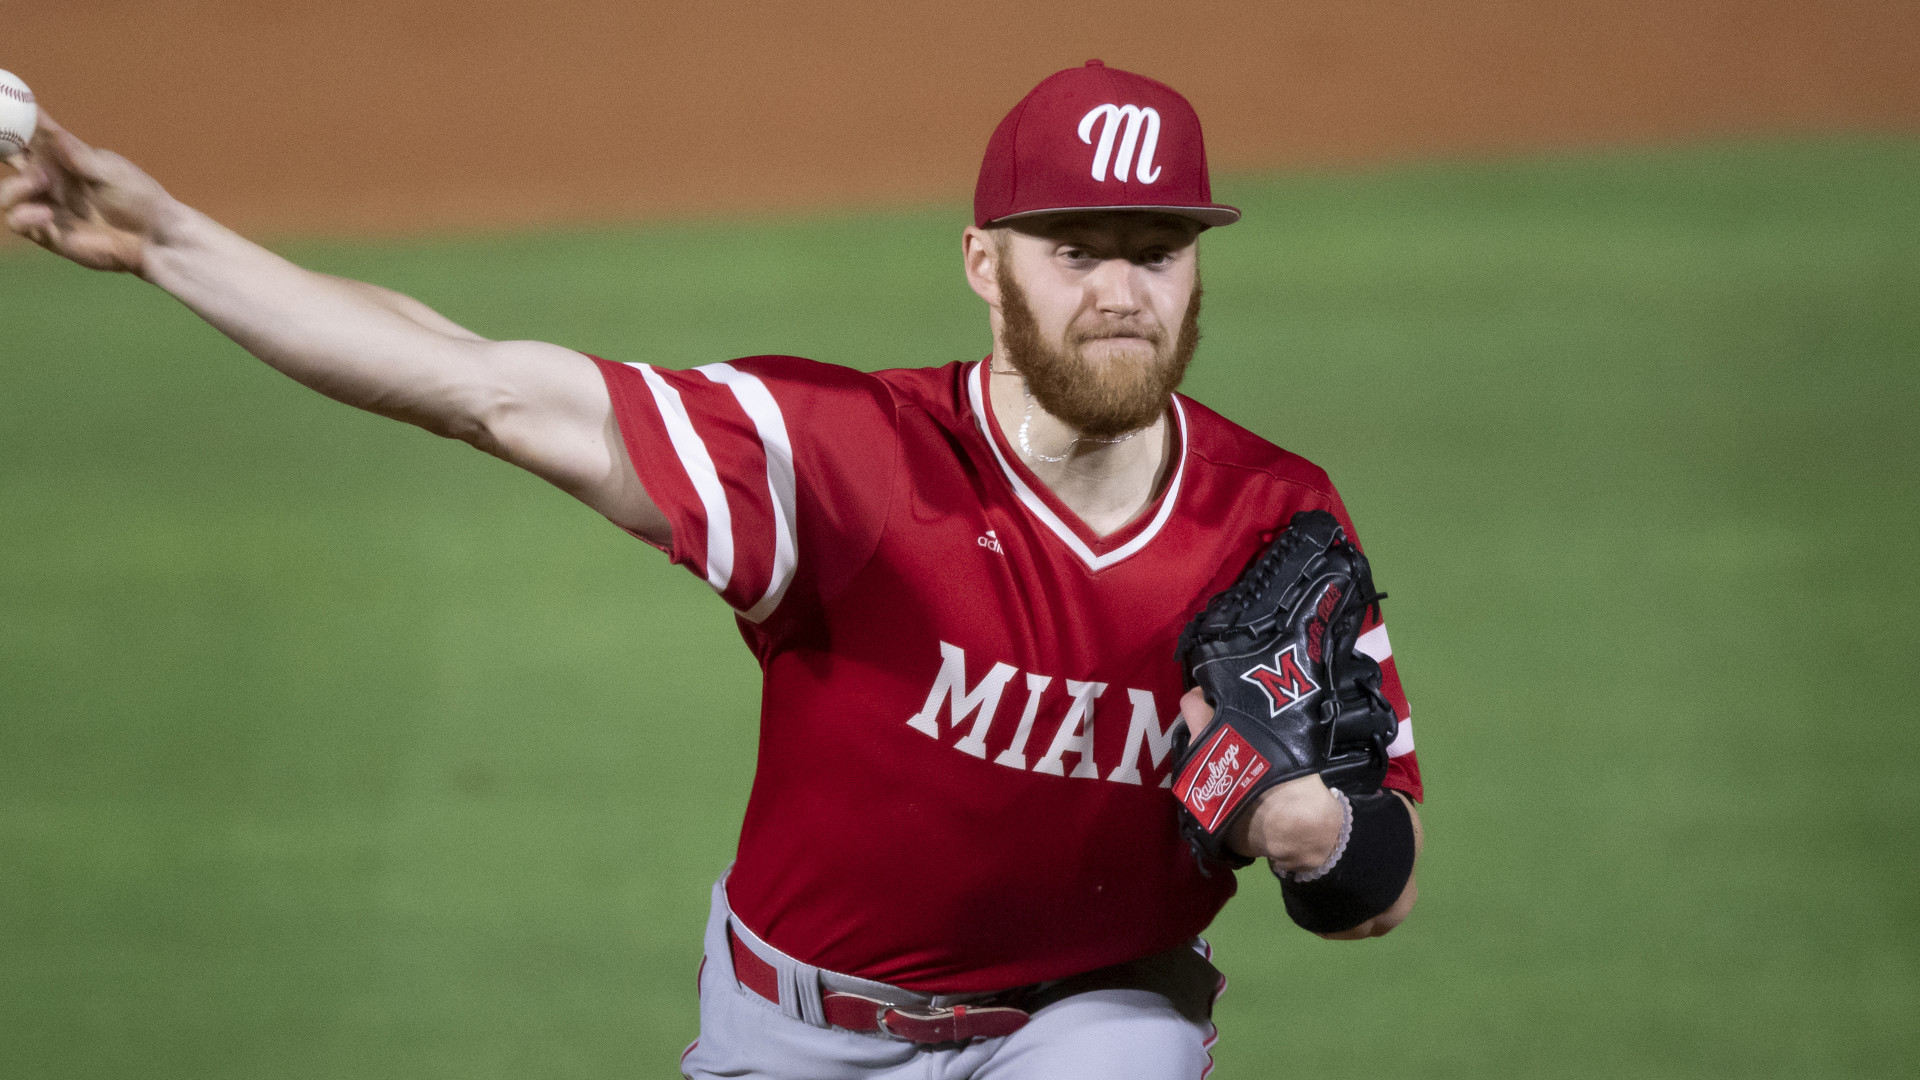 MLB Draft 2021: Angels select RHP Sam Bachman from Miami (OH